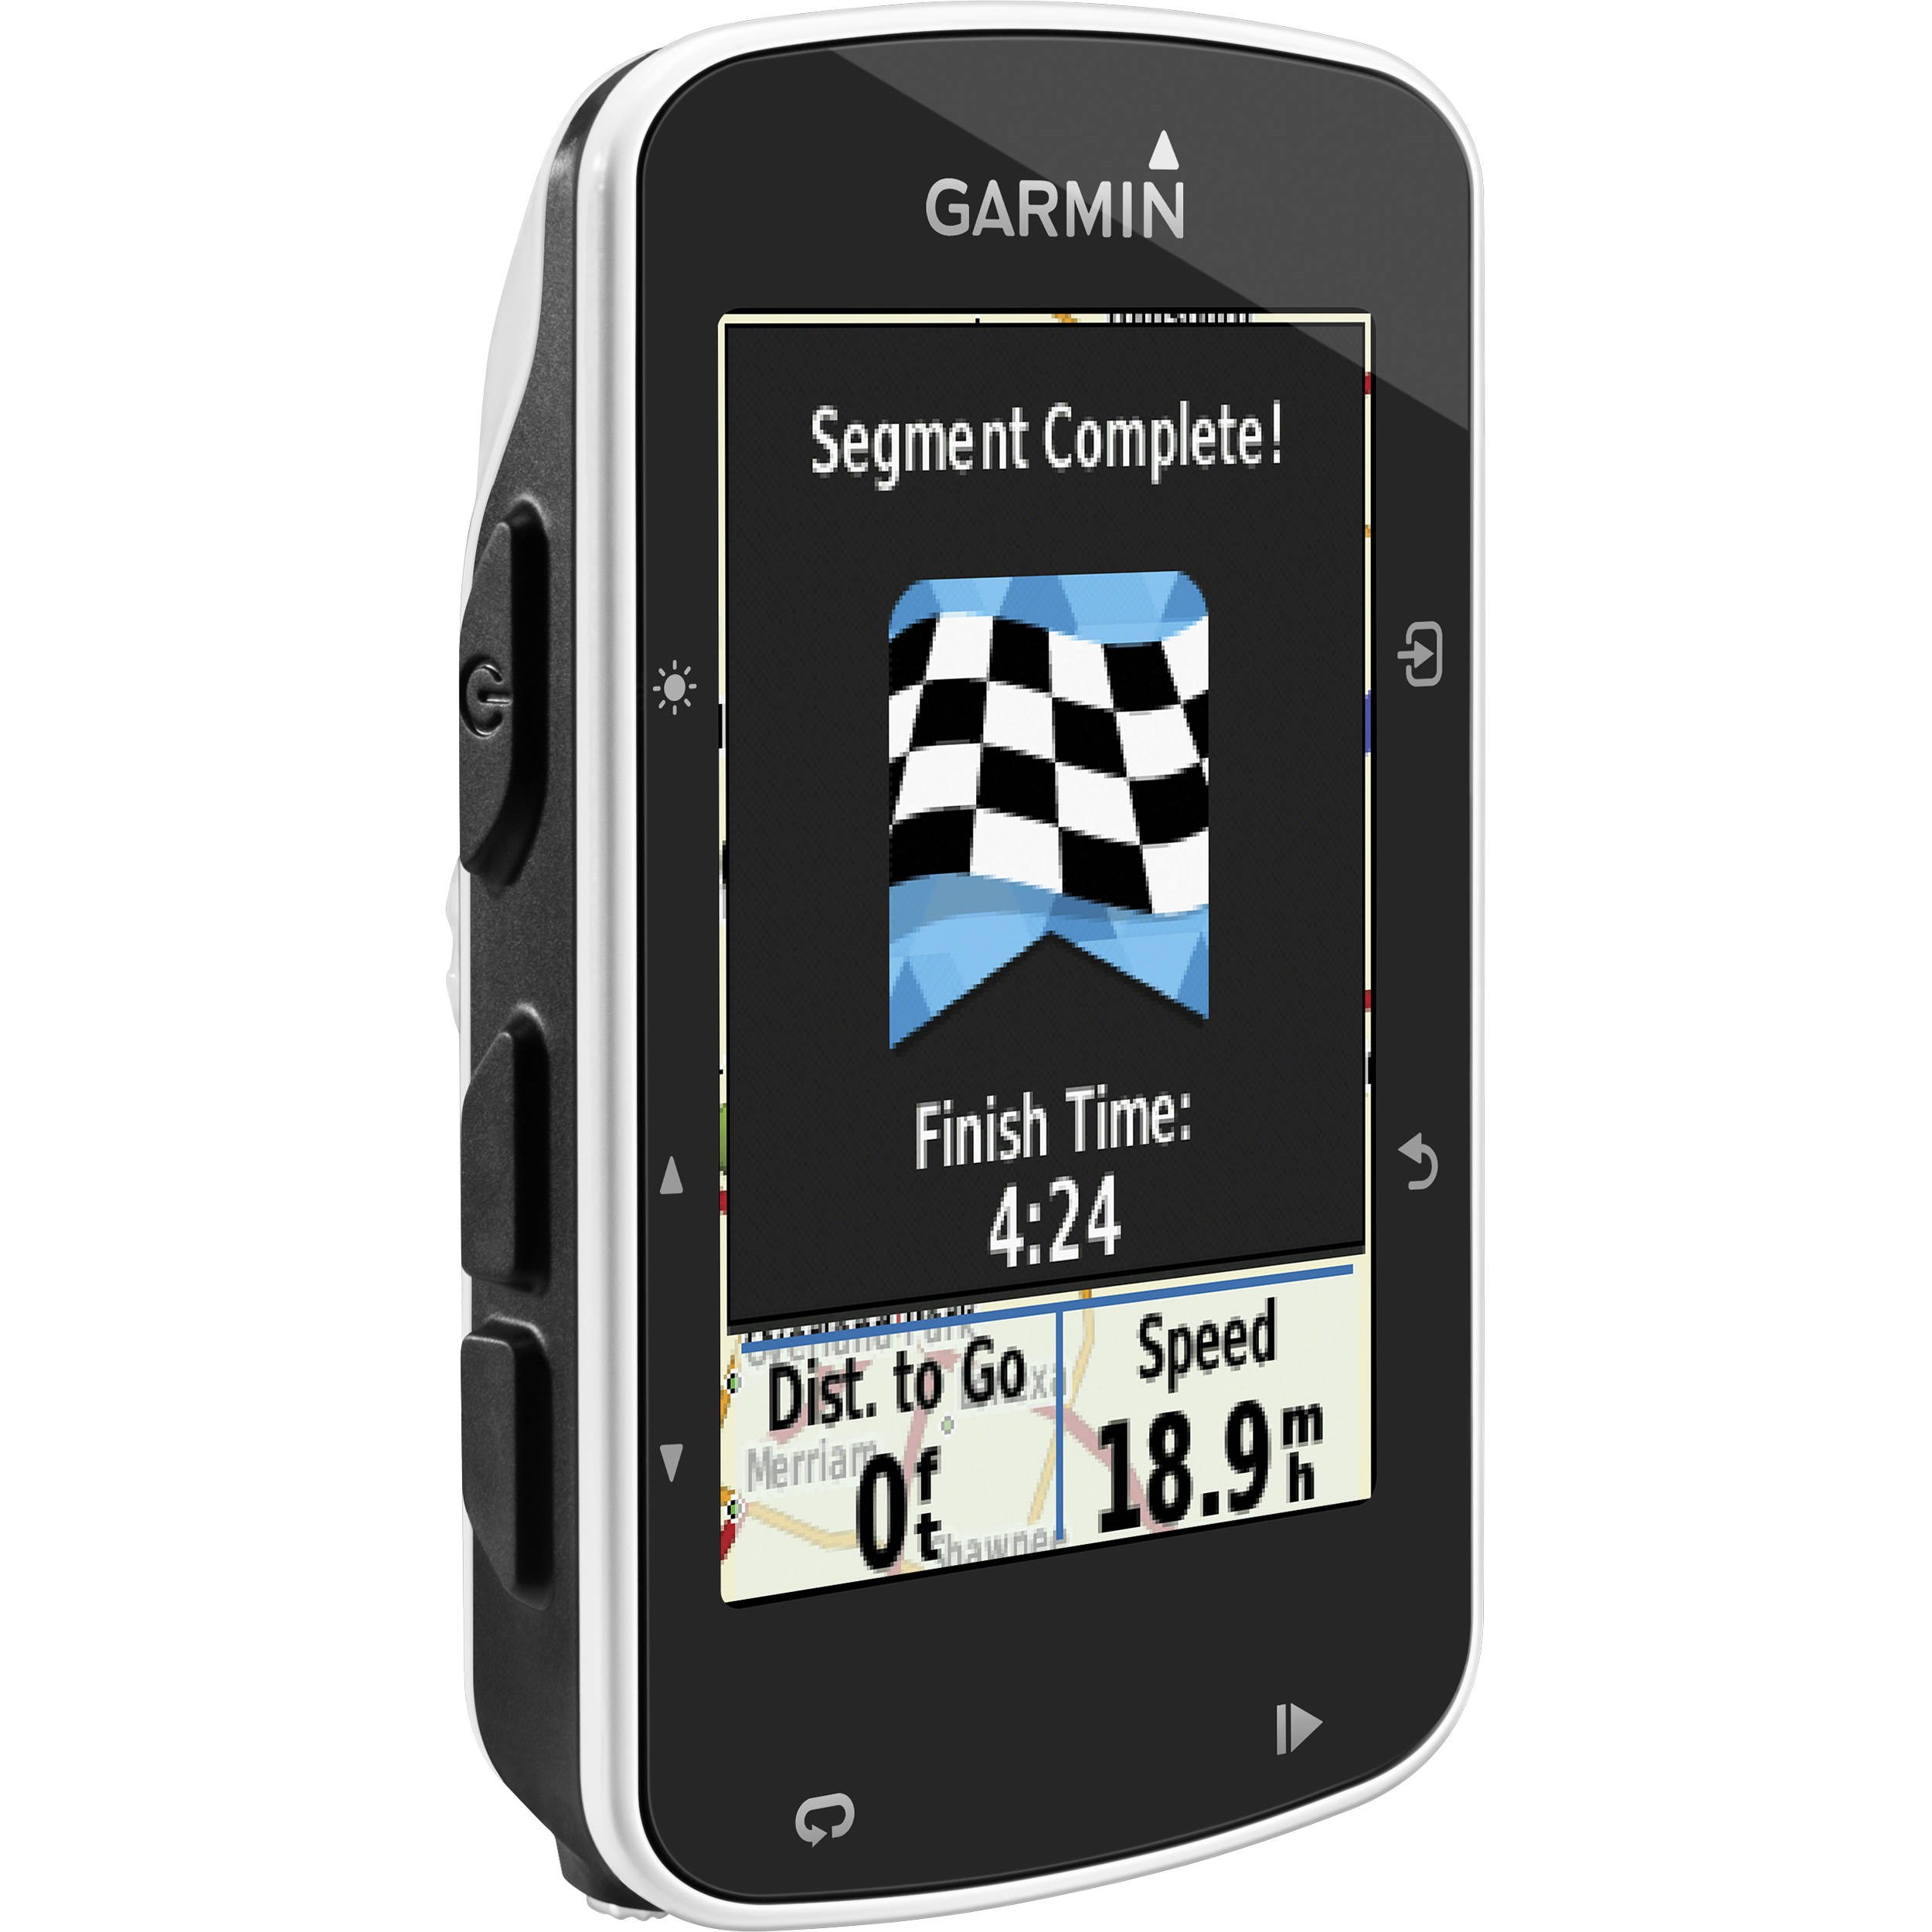 Celsius Slagschip Wrijven The Garmin Edge 520 Plus updates the rider-favorite Edge 520 with advanced  navigation, built-in challenges, and improved smartphone integration. With  its GPS and GLONASS connectivity, the Edge 520 Plus can track position,